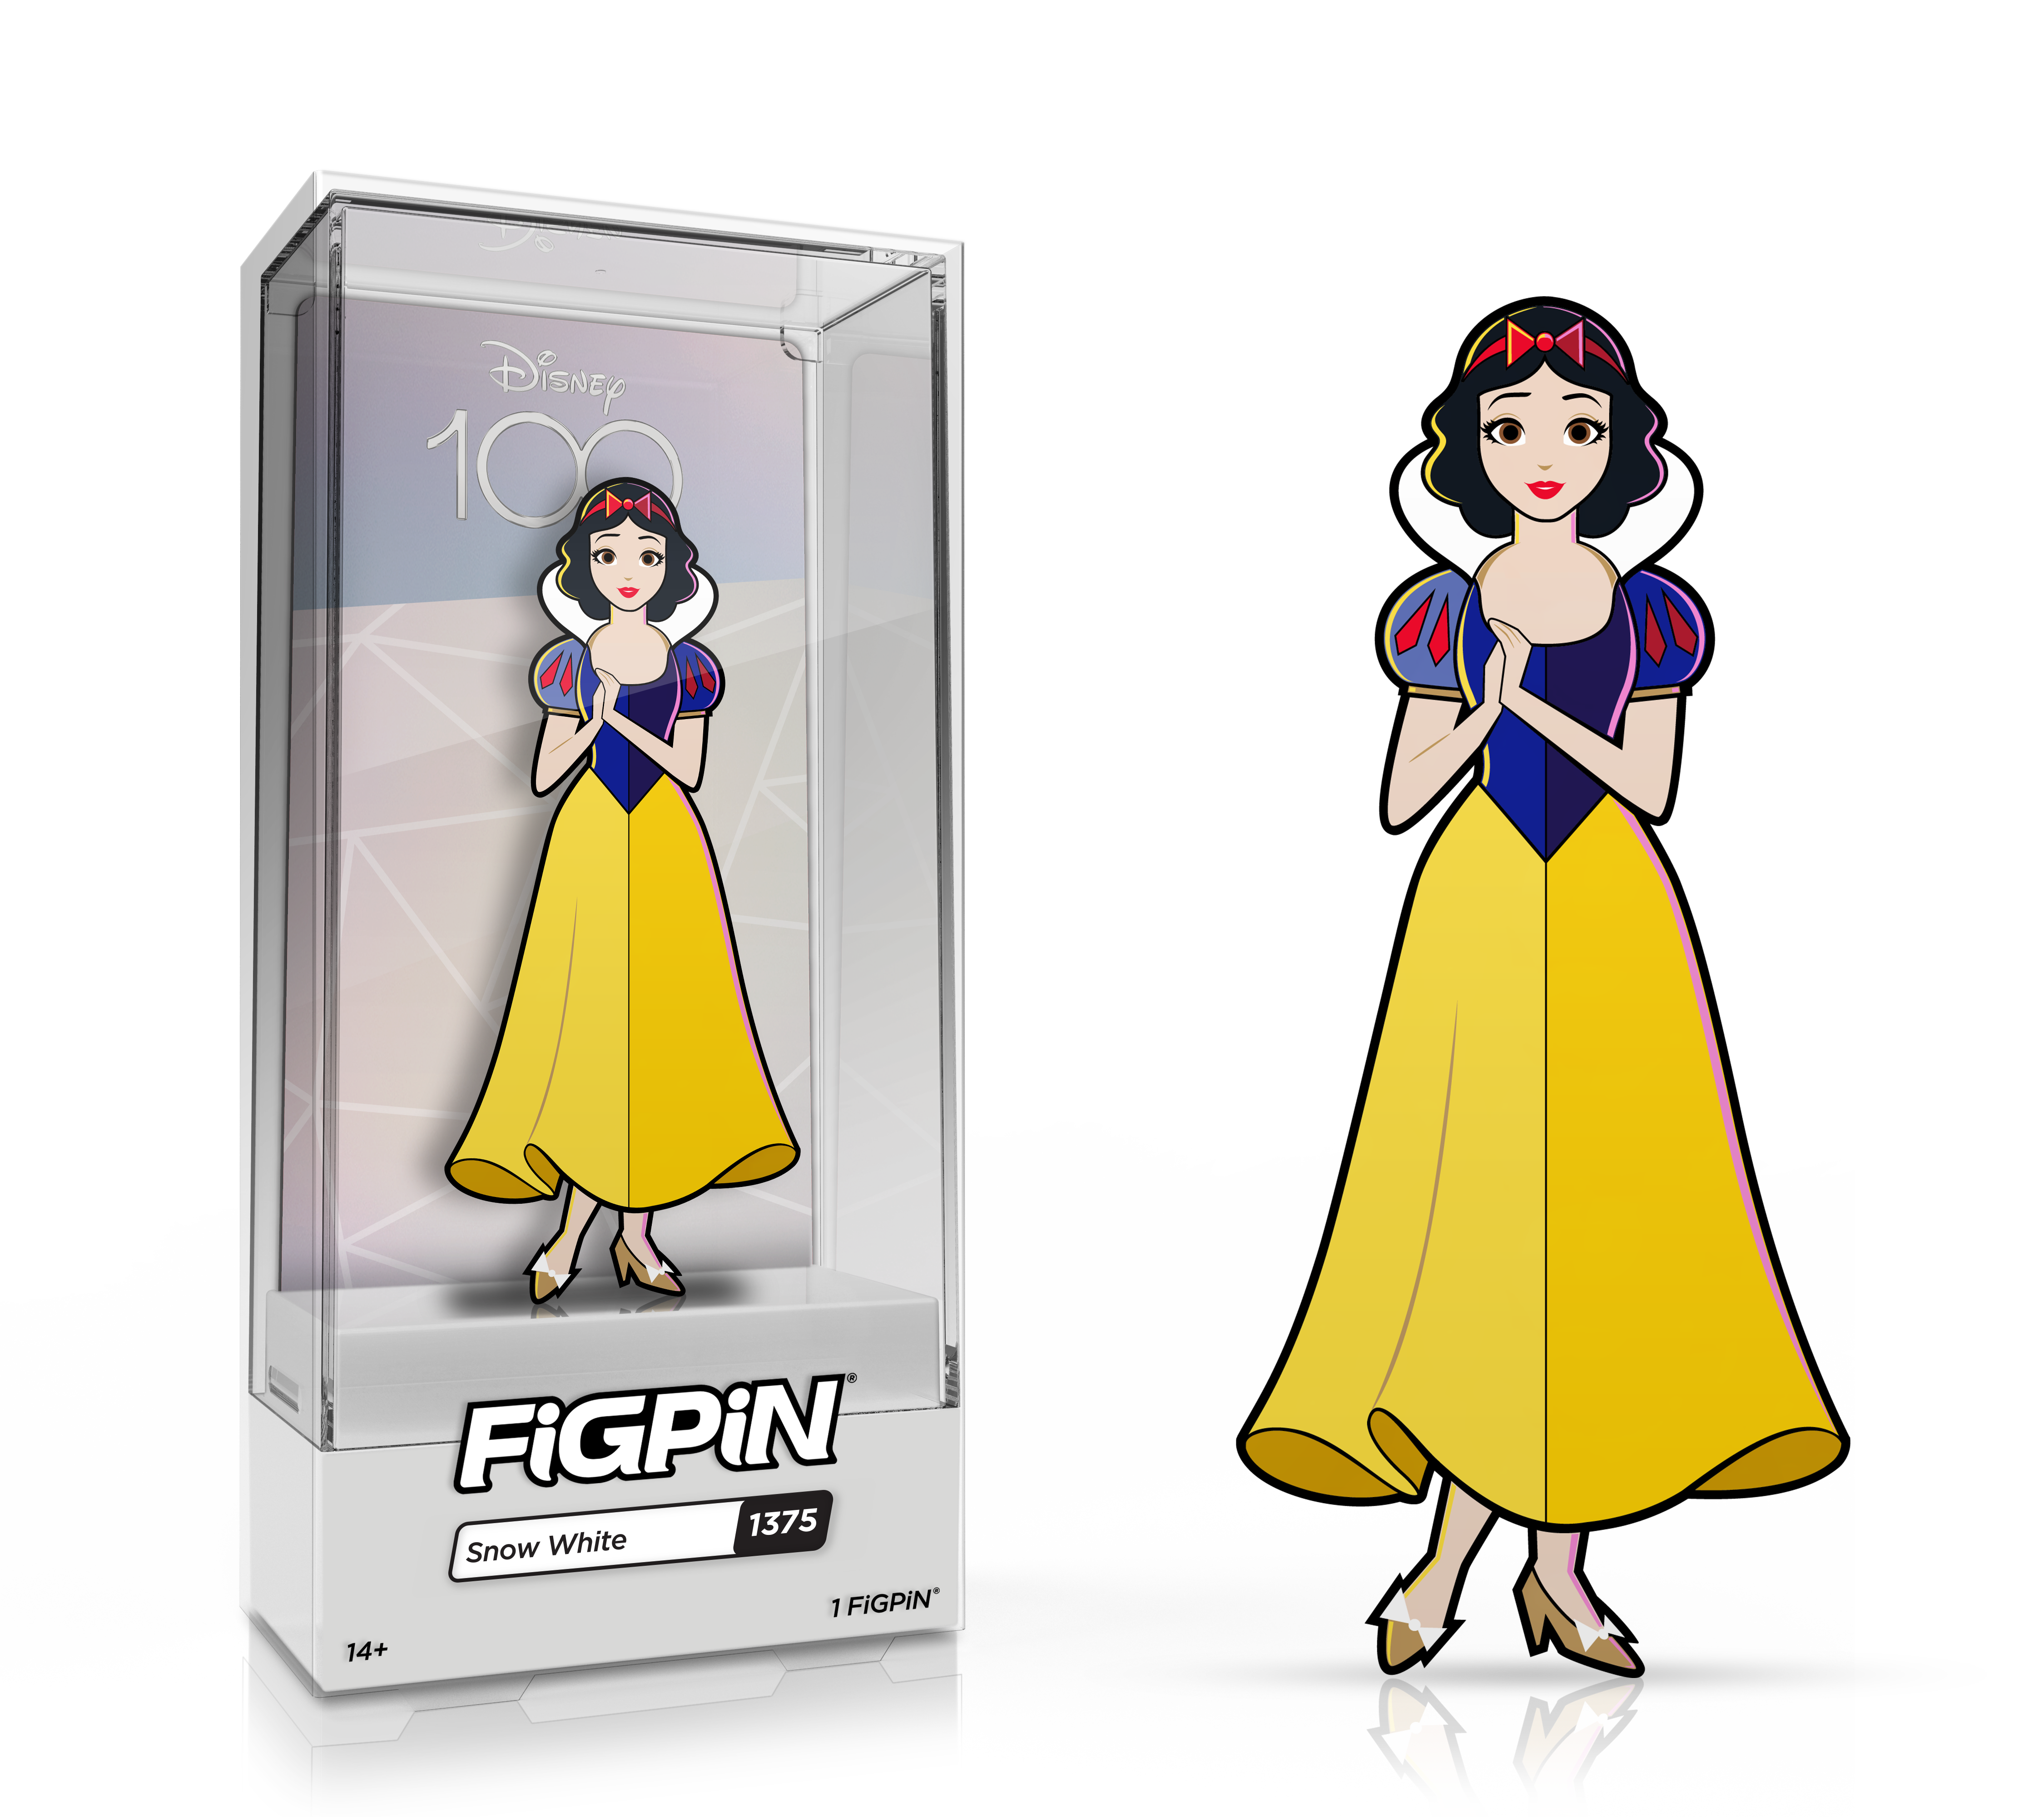 Side by side view of the Snow White enamel pin in display case and the art render.